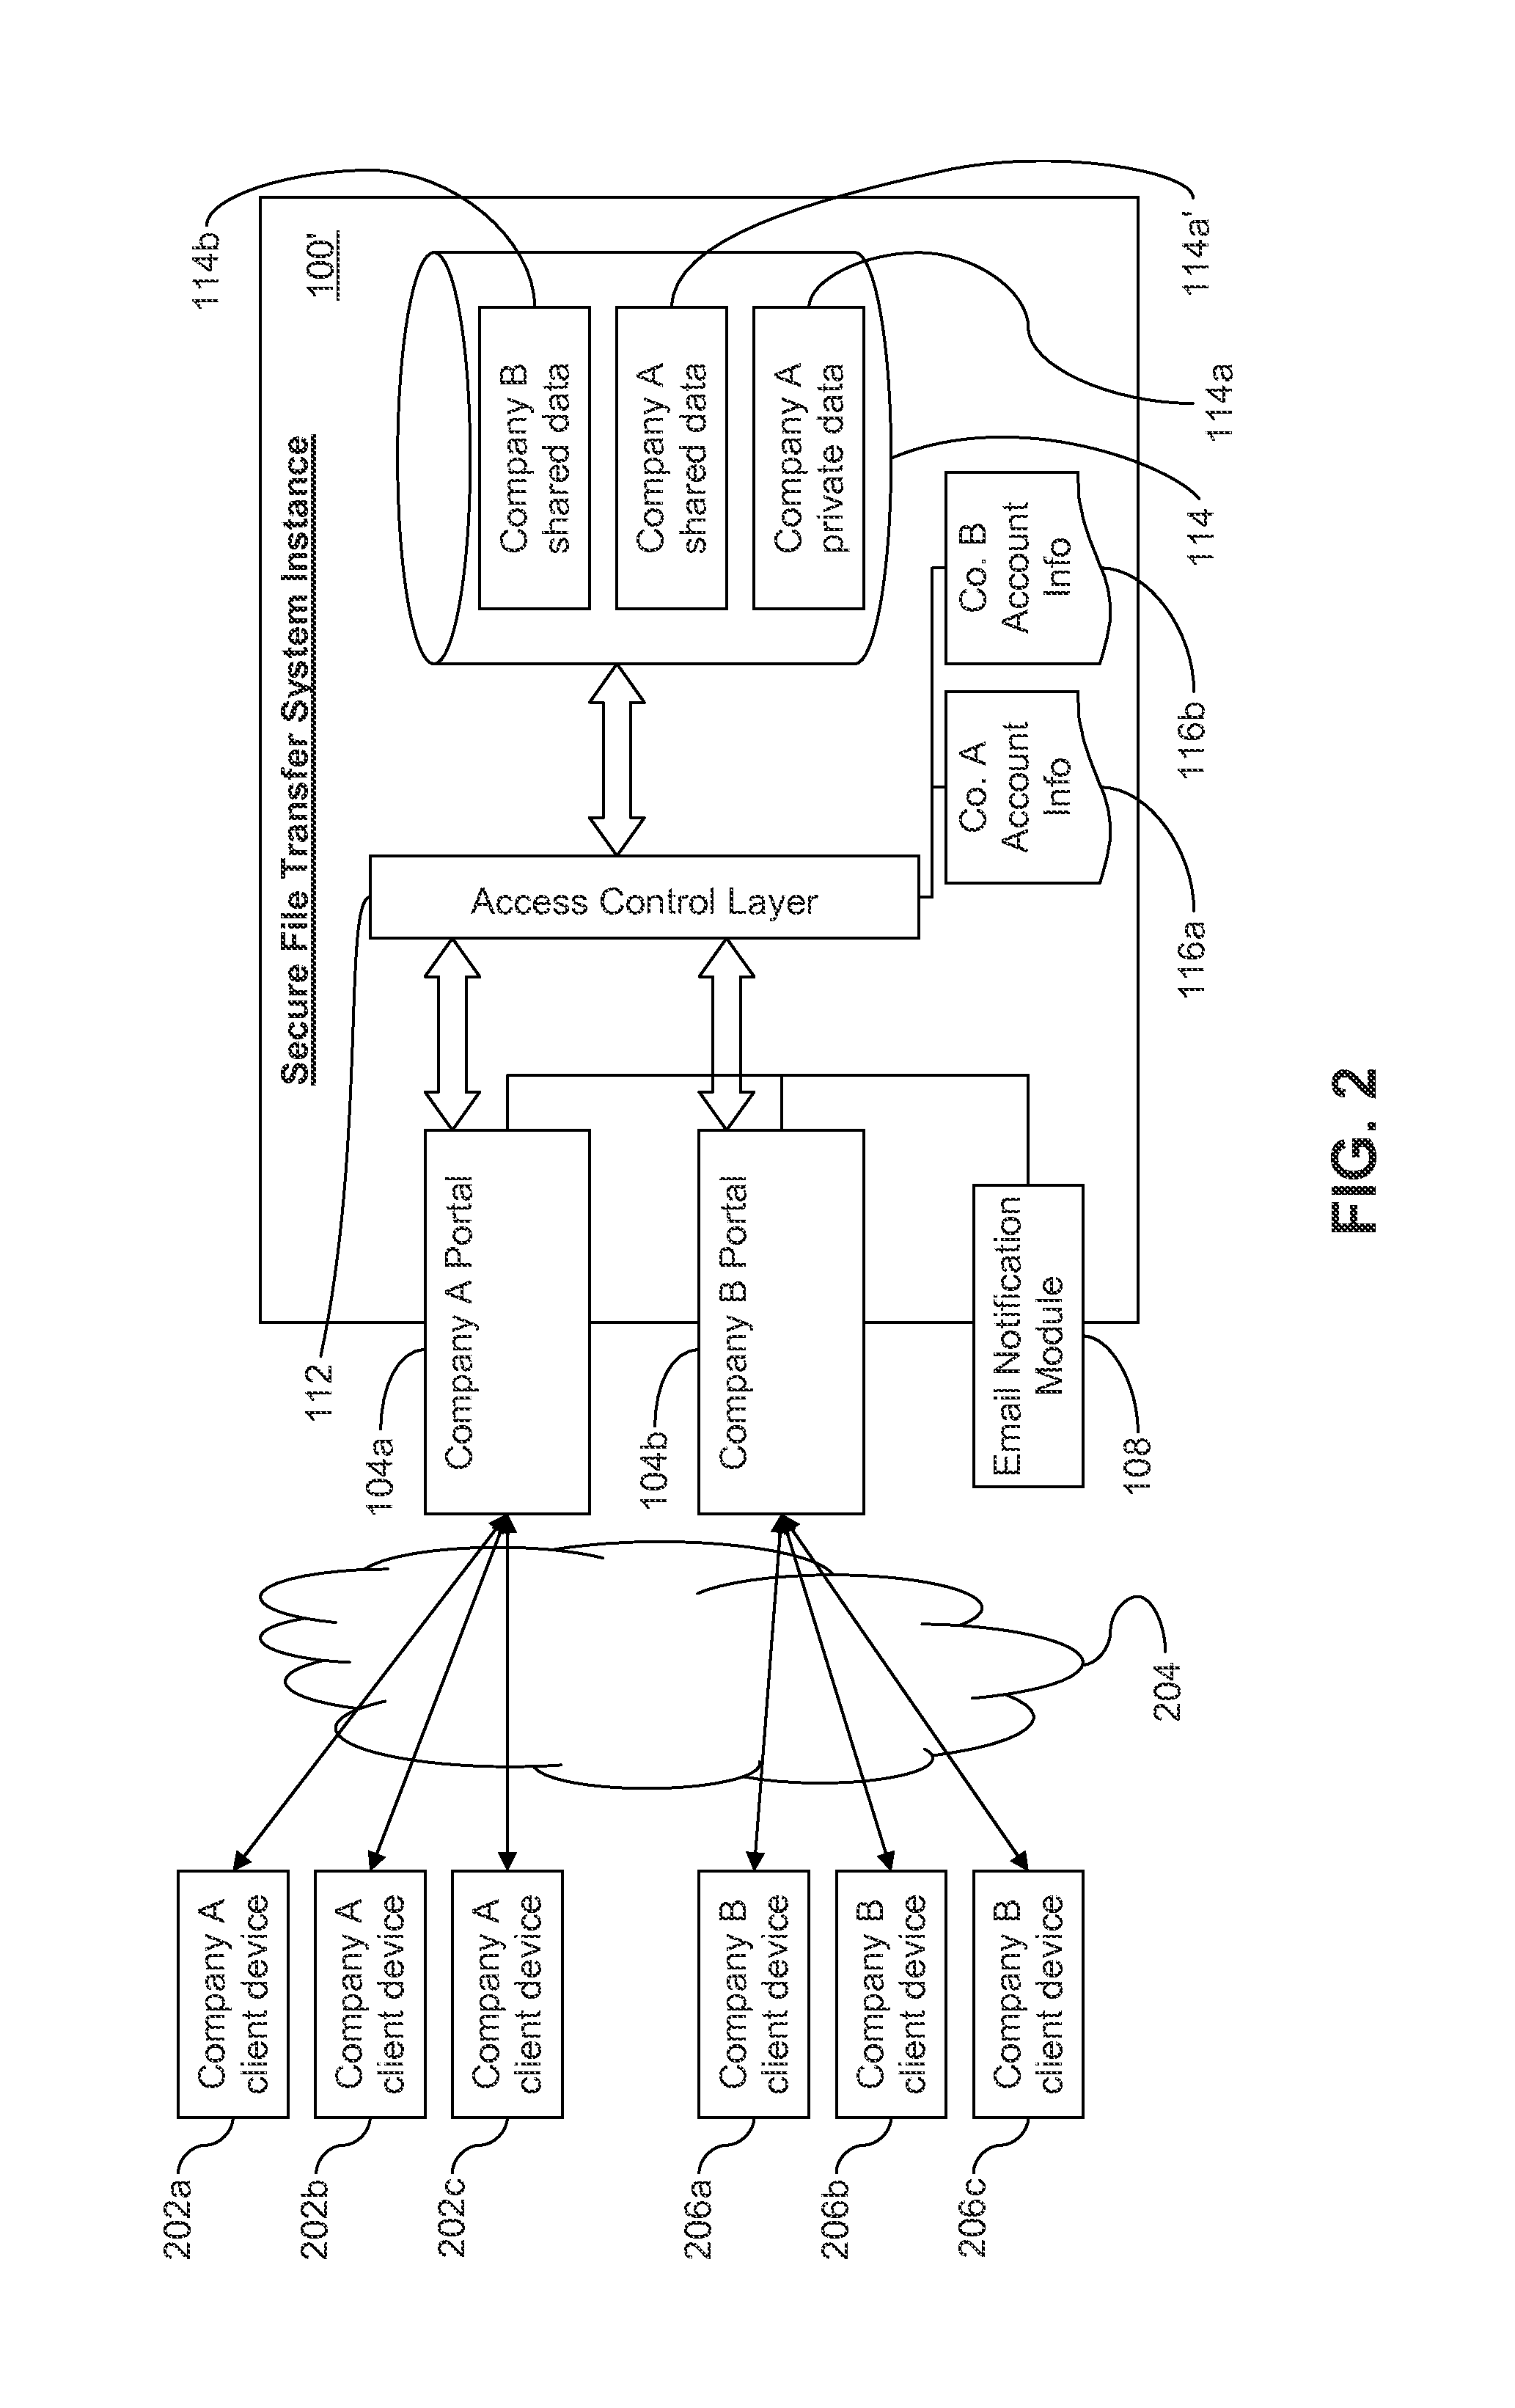 Secure file transfer systems and methods